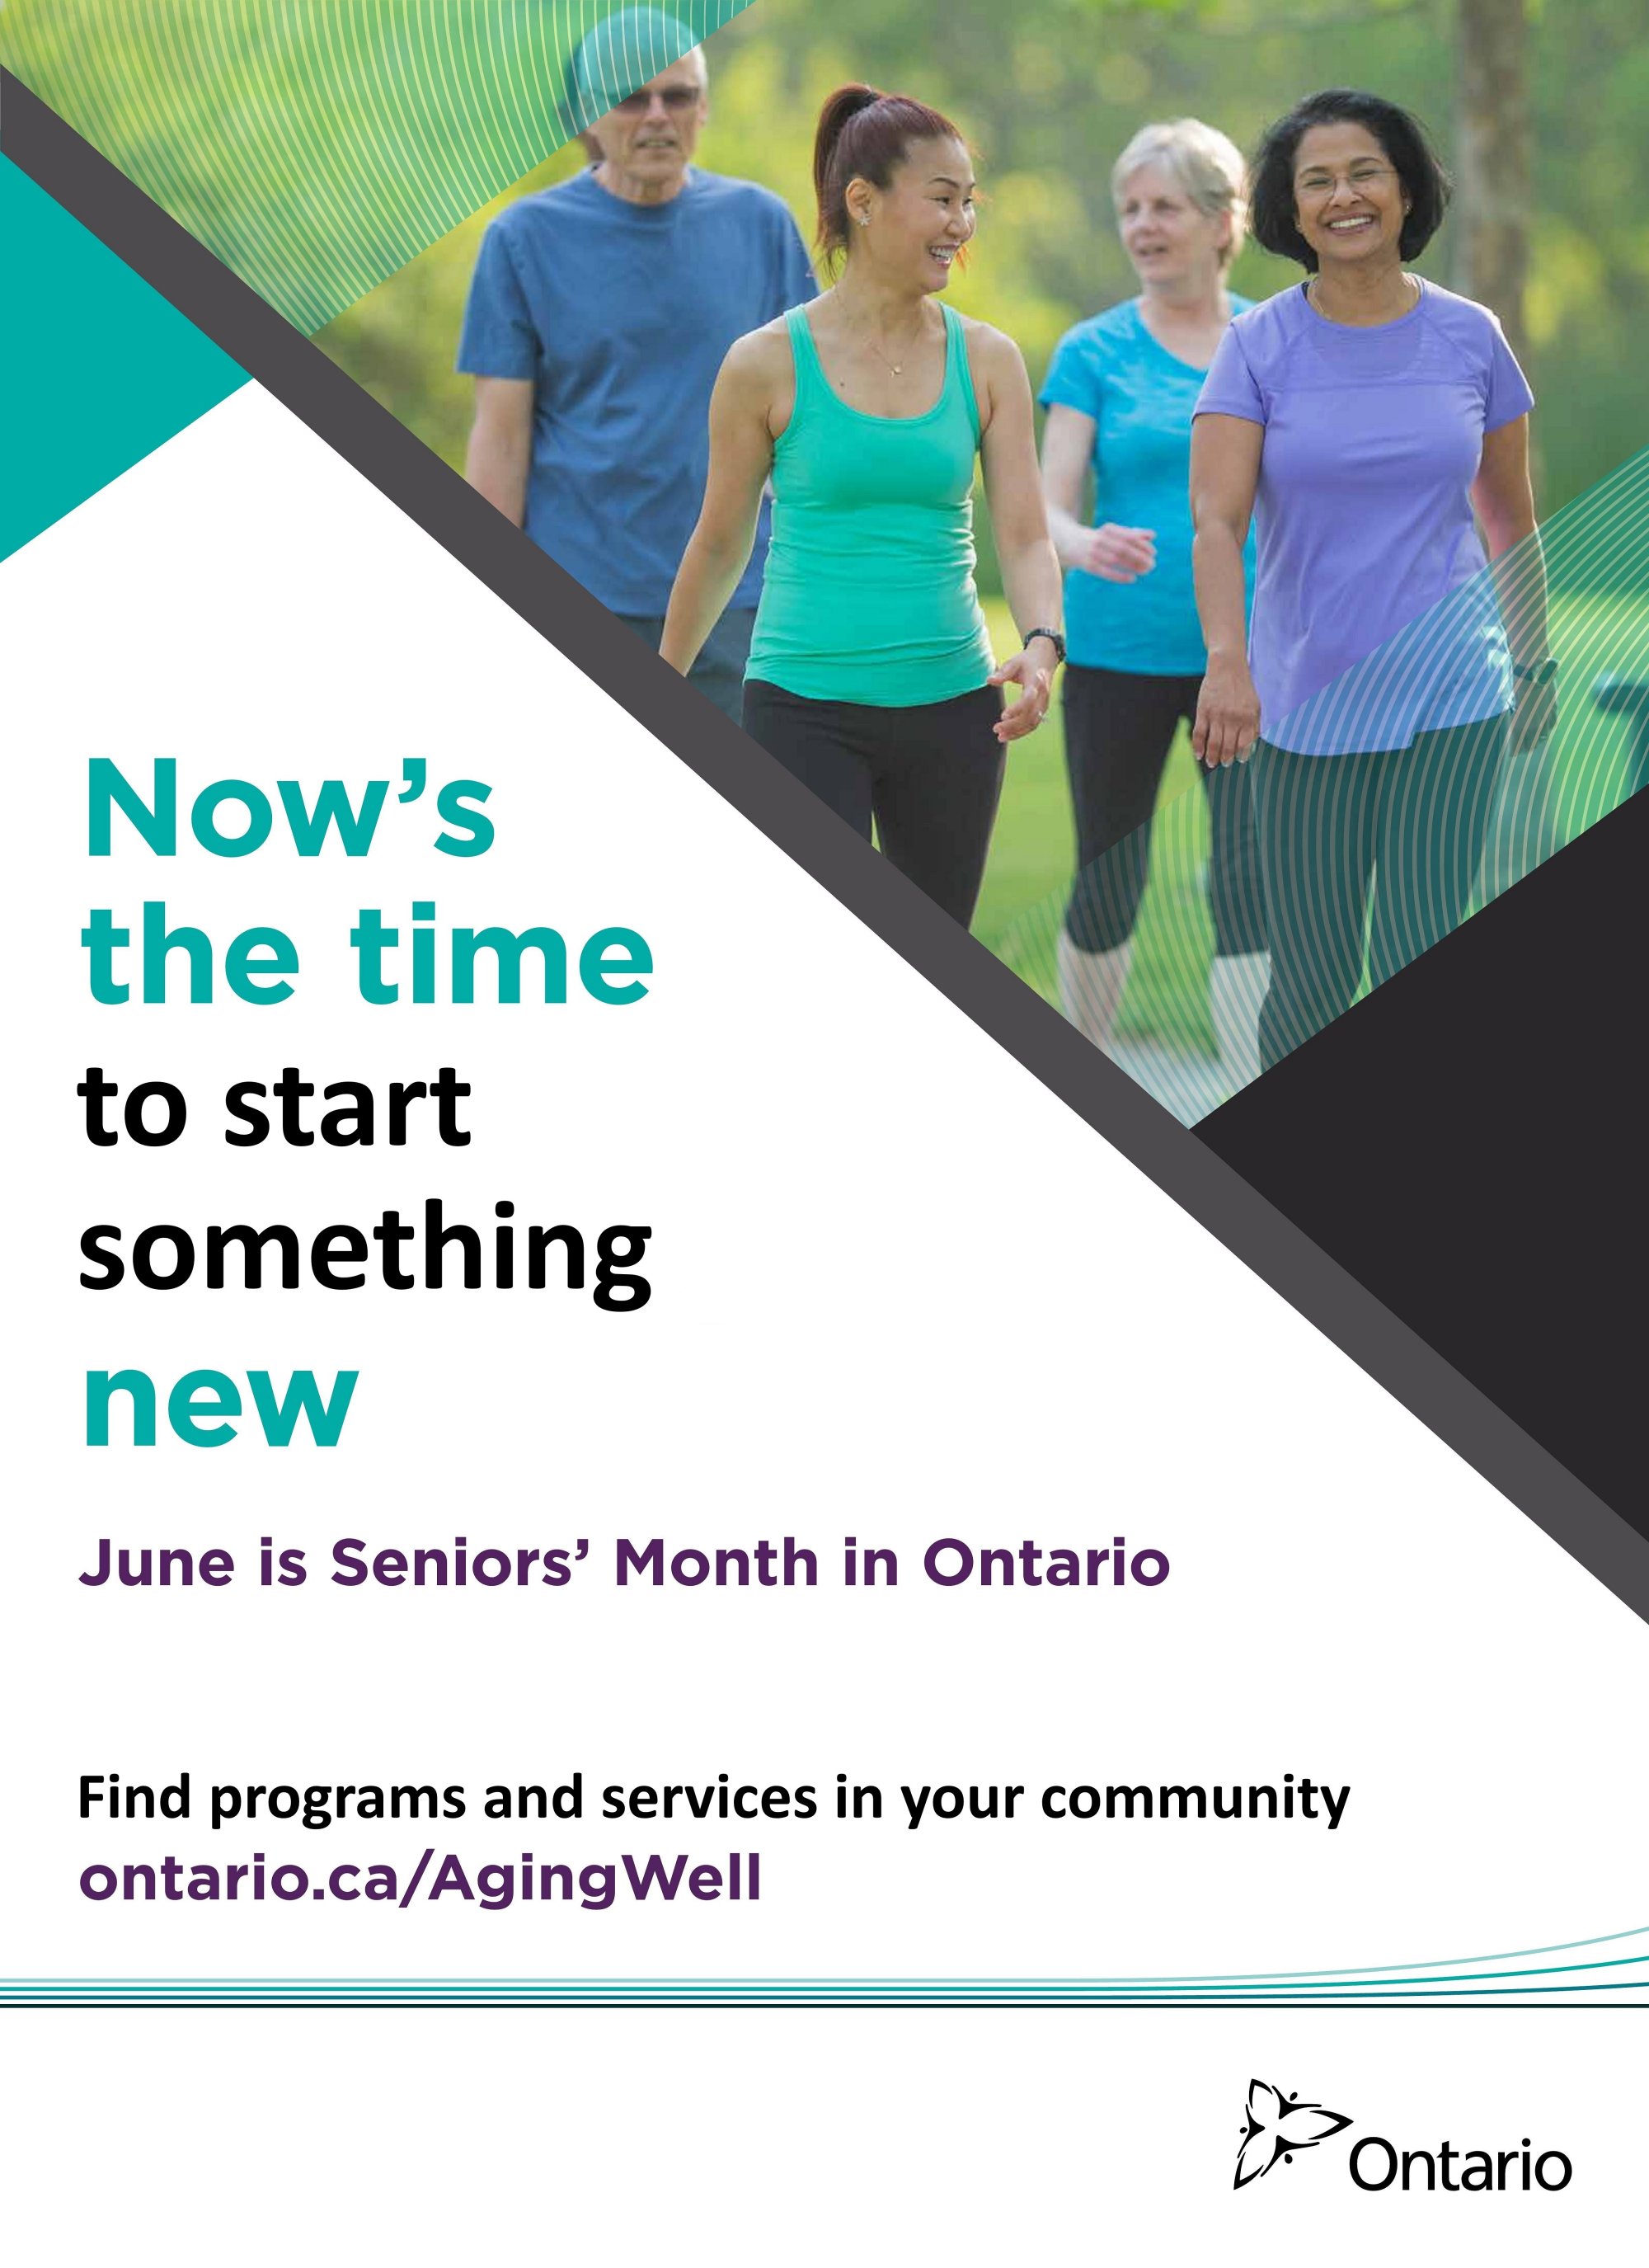 Seniors Month Poster 2018 image from email Ontario Age-Friendly Communities Outreach Program swebster@seniorshealthknowledgenetwork.com To:sq1oacatahoo.ca May 4, 2018 at 3:49 pm